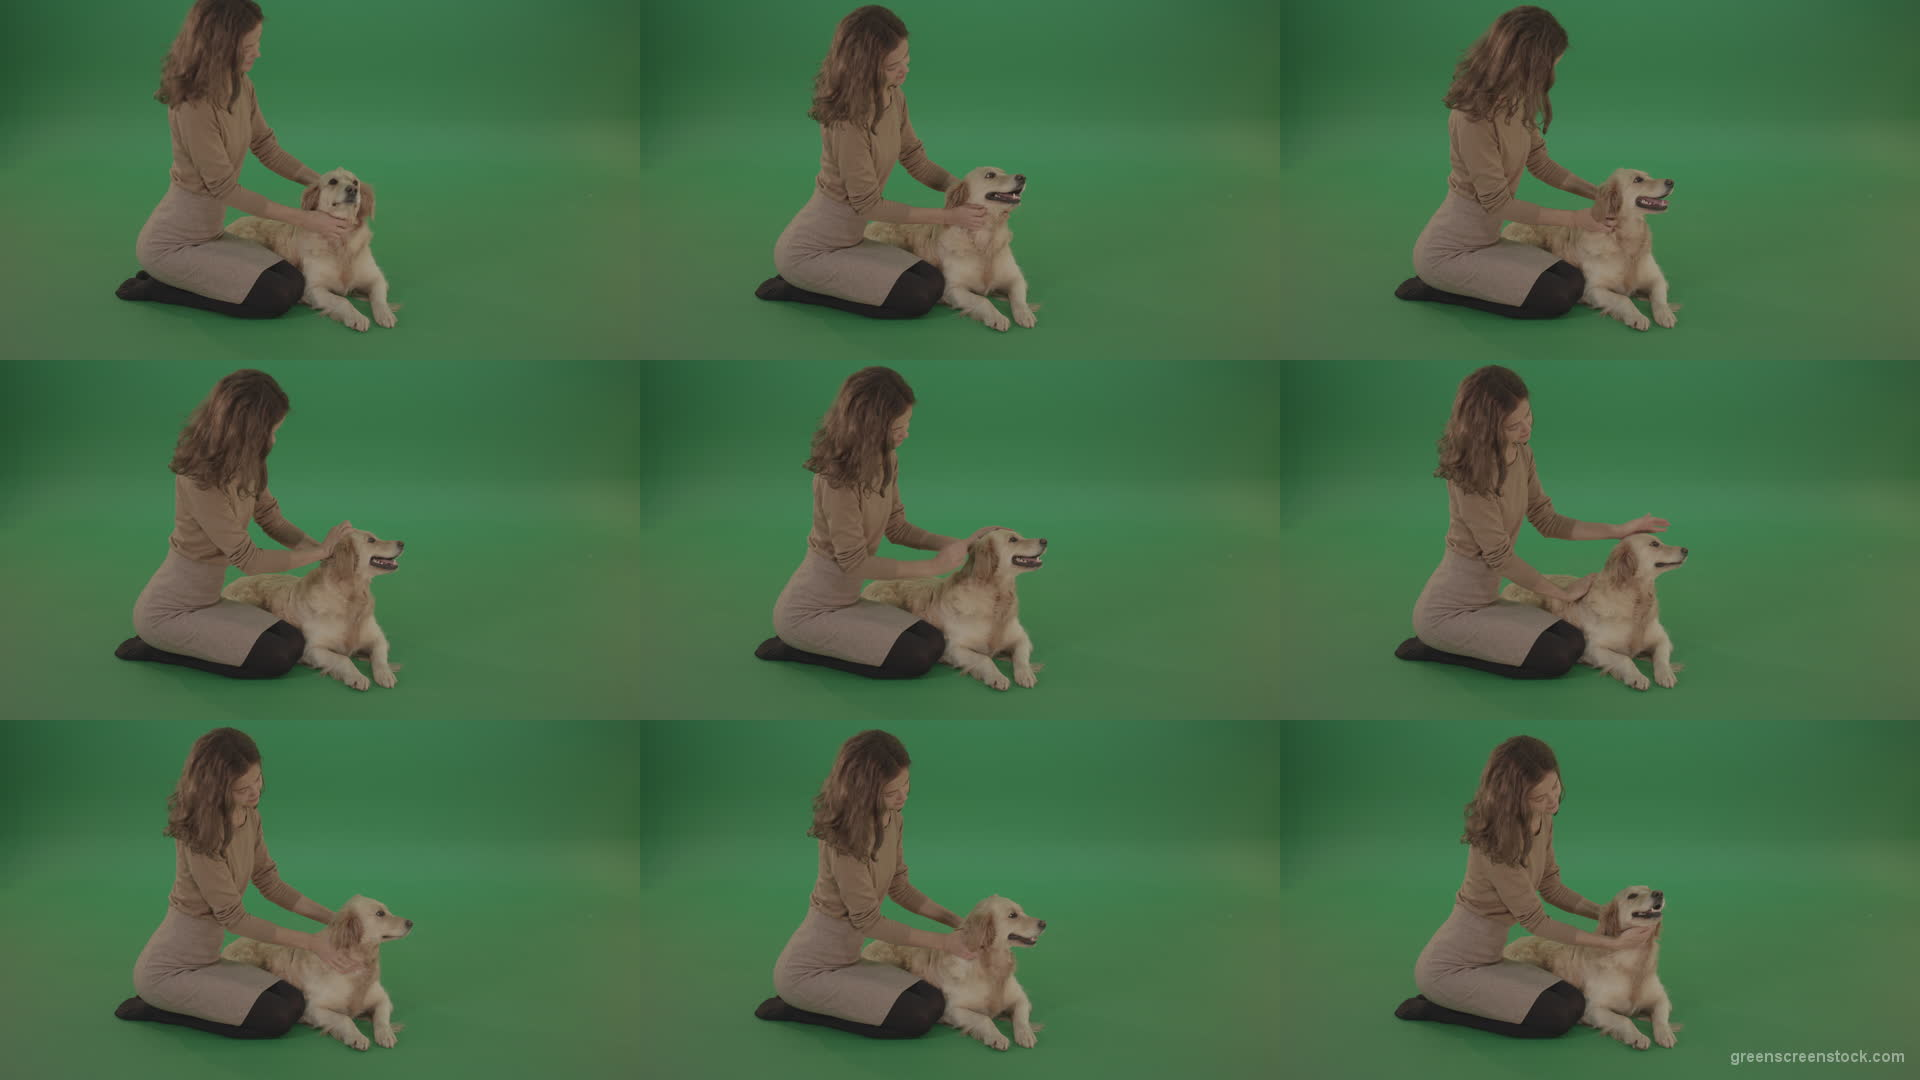 Young-Girl-stroke-the-dog-golden-retriever-big-puppy-isolated-on-green-screen-background Green Screen Stock